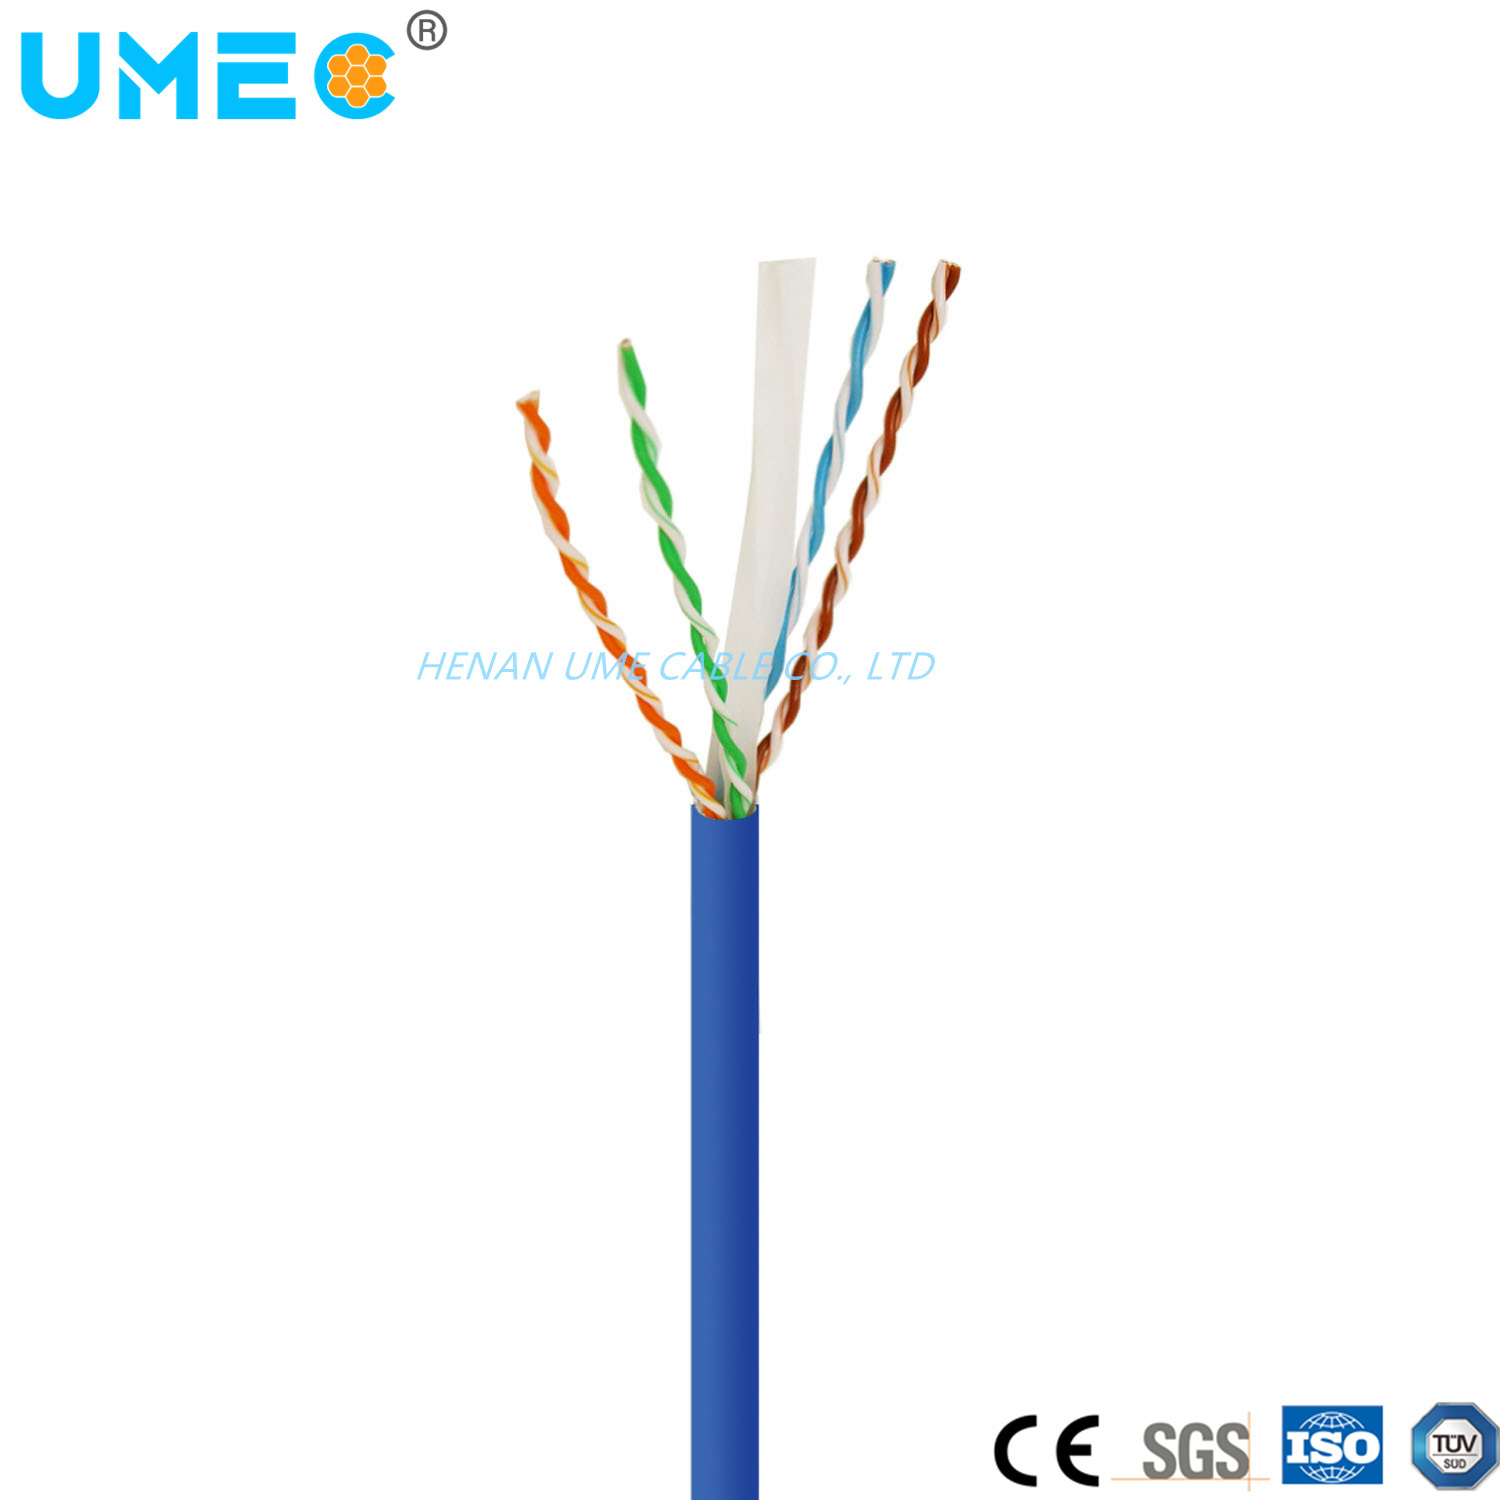 Free Sample Network Type Ethernet Cable Cat5e/CAT6/Cat7 UTP Communication Cabling Patch Cord Price